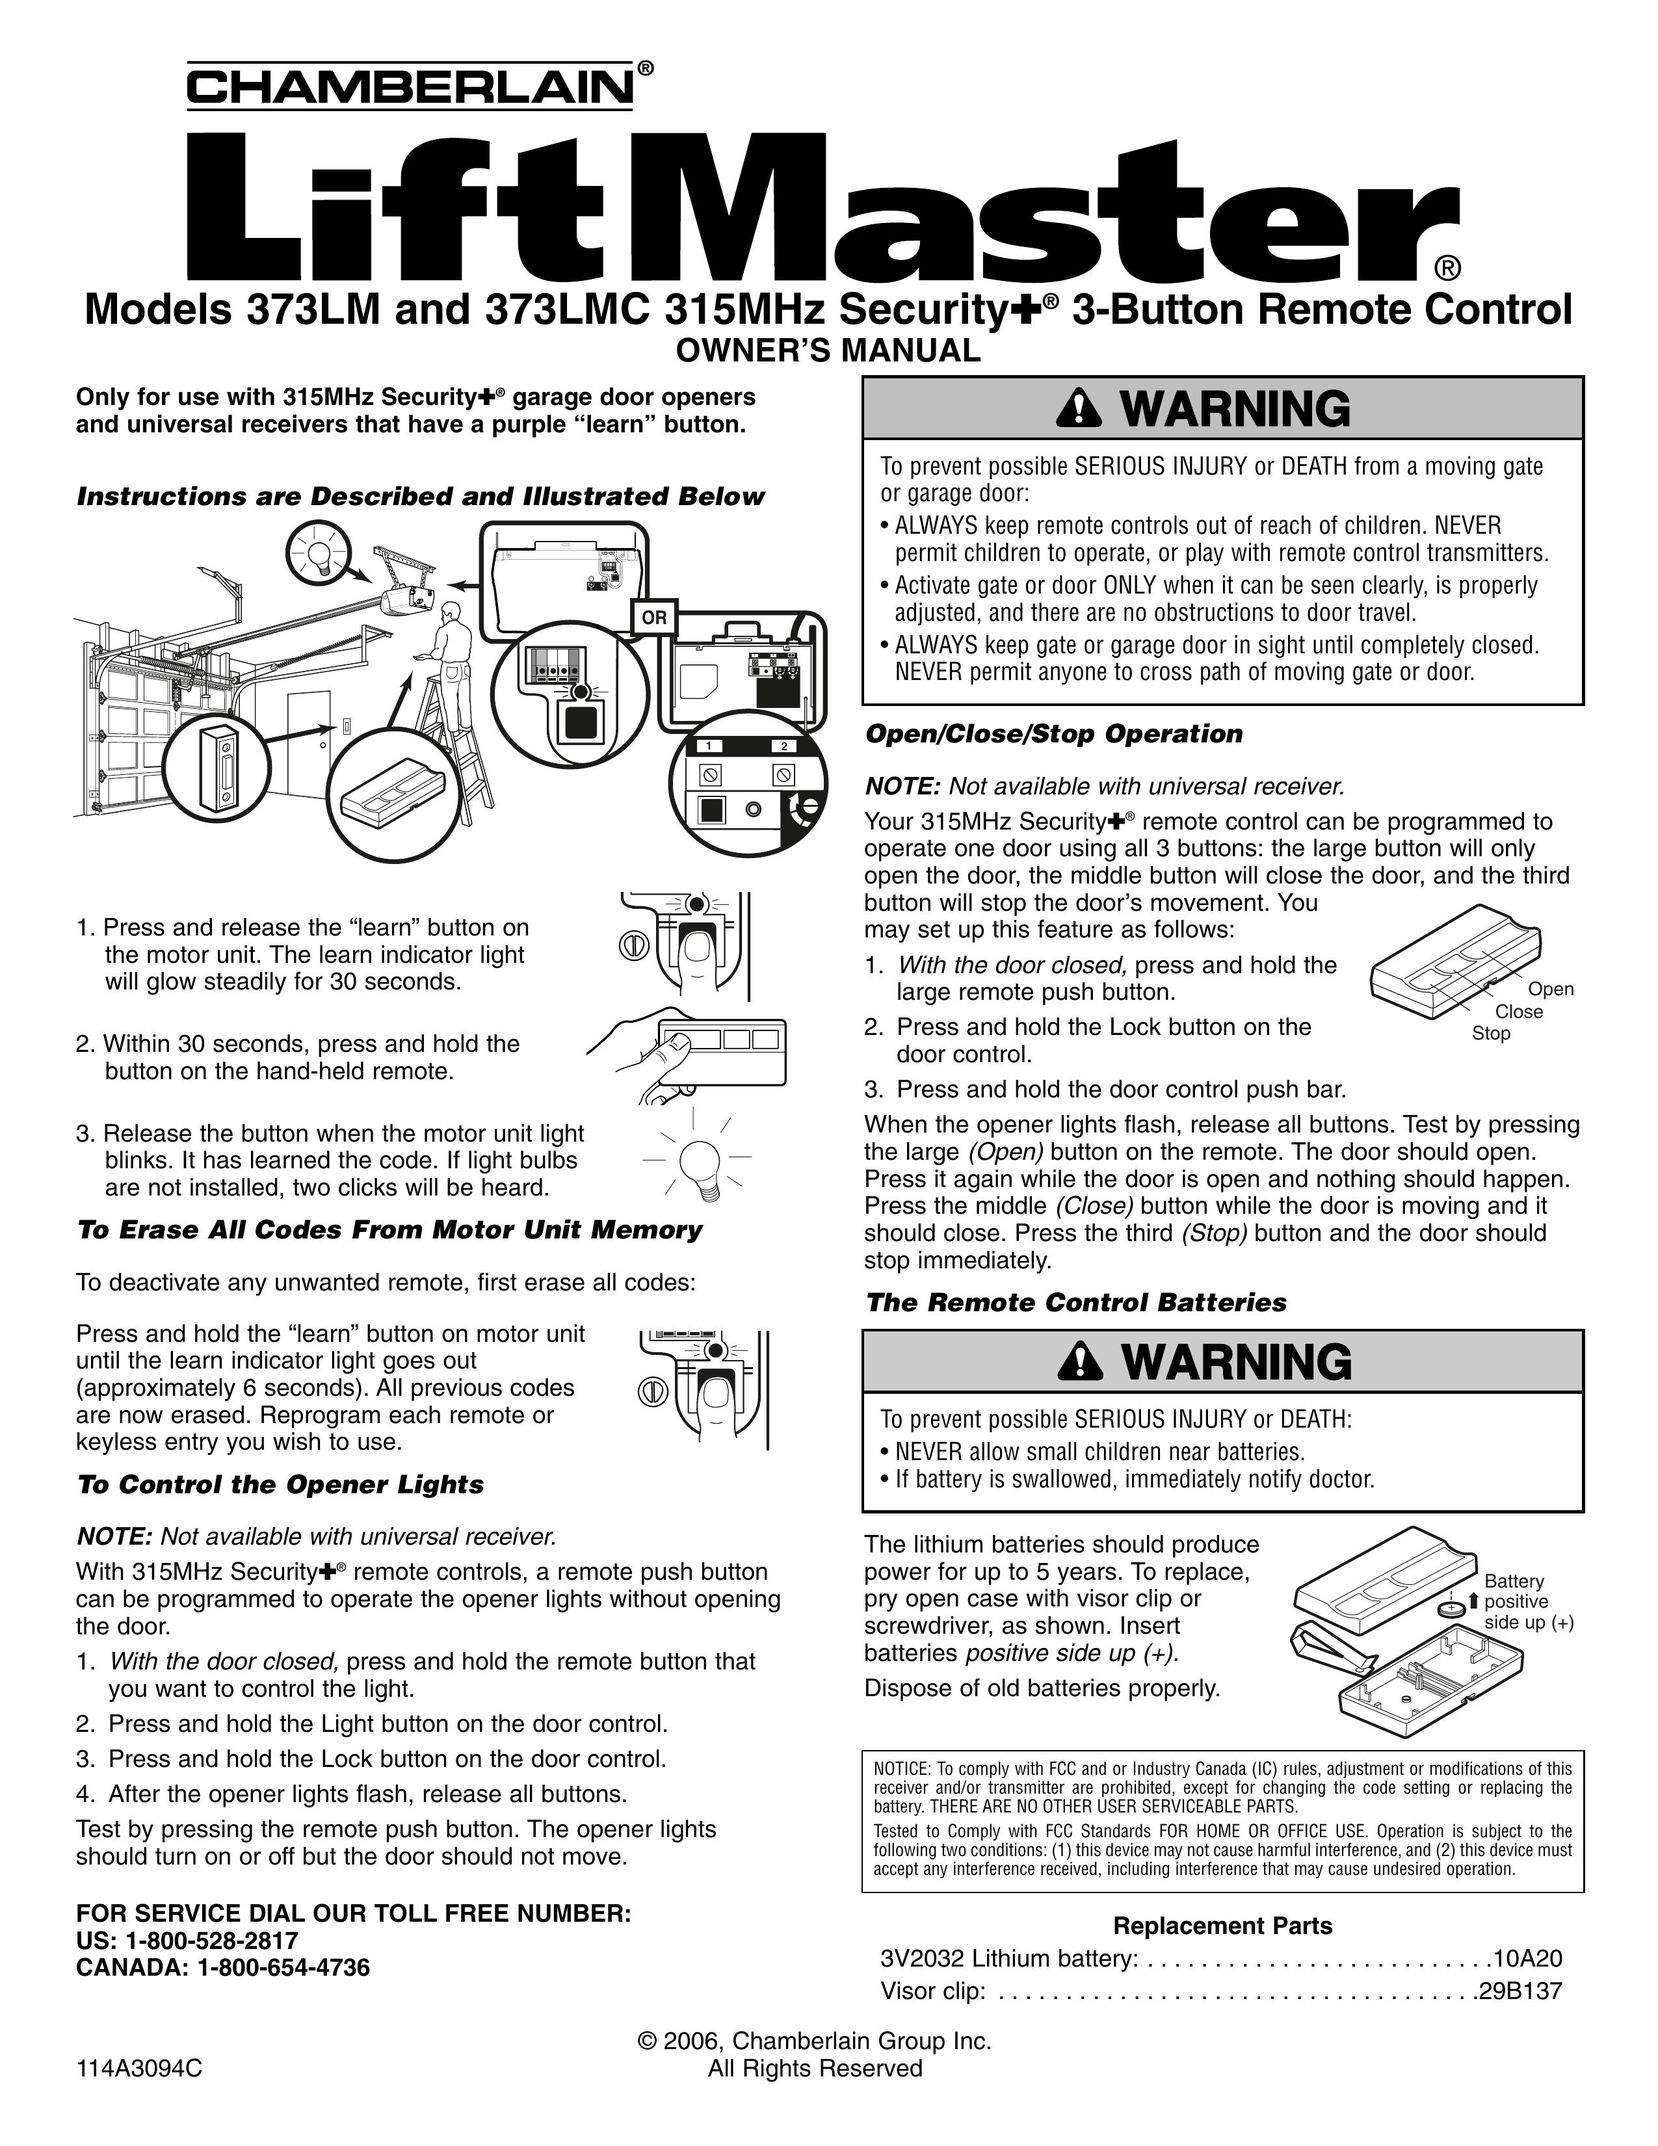 Chamberlain 373LM Universal Remote User Manual (Page 1)